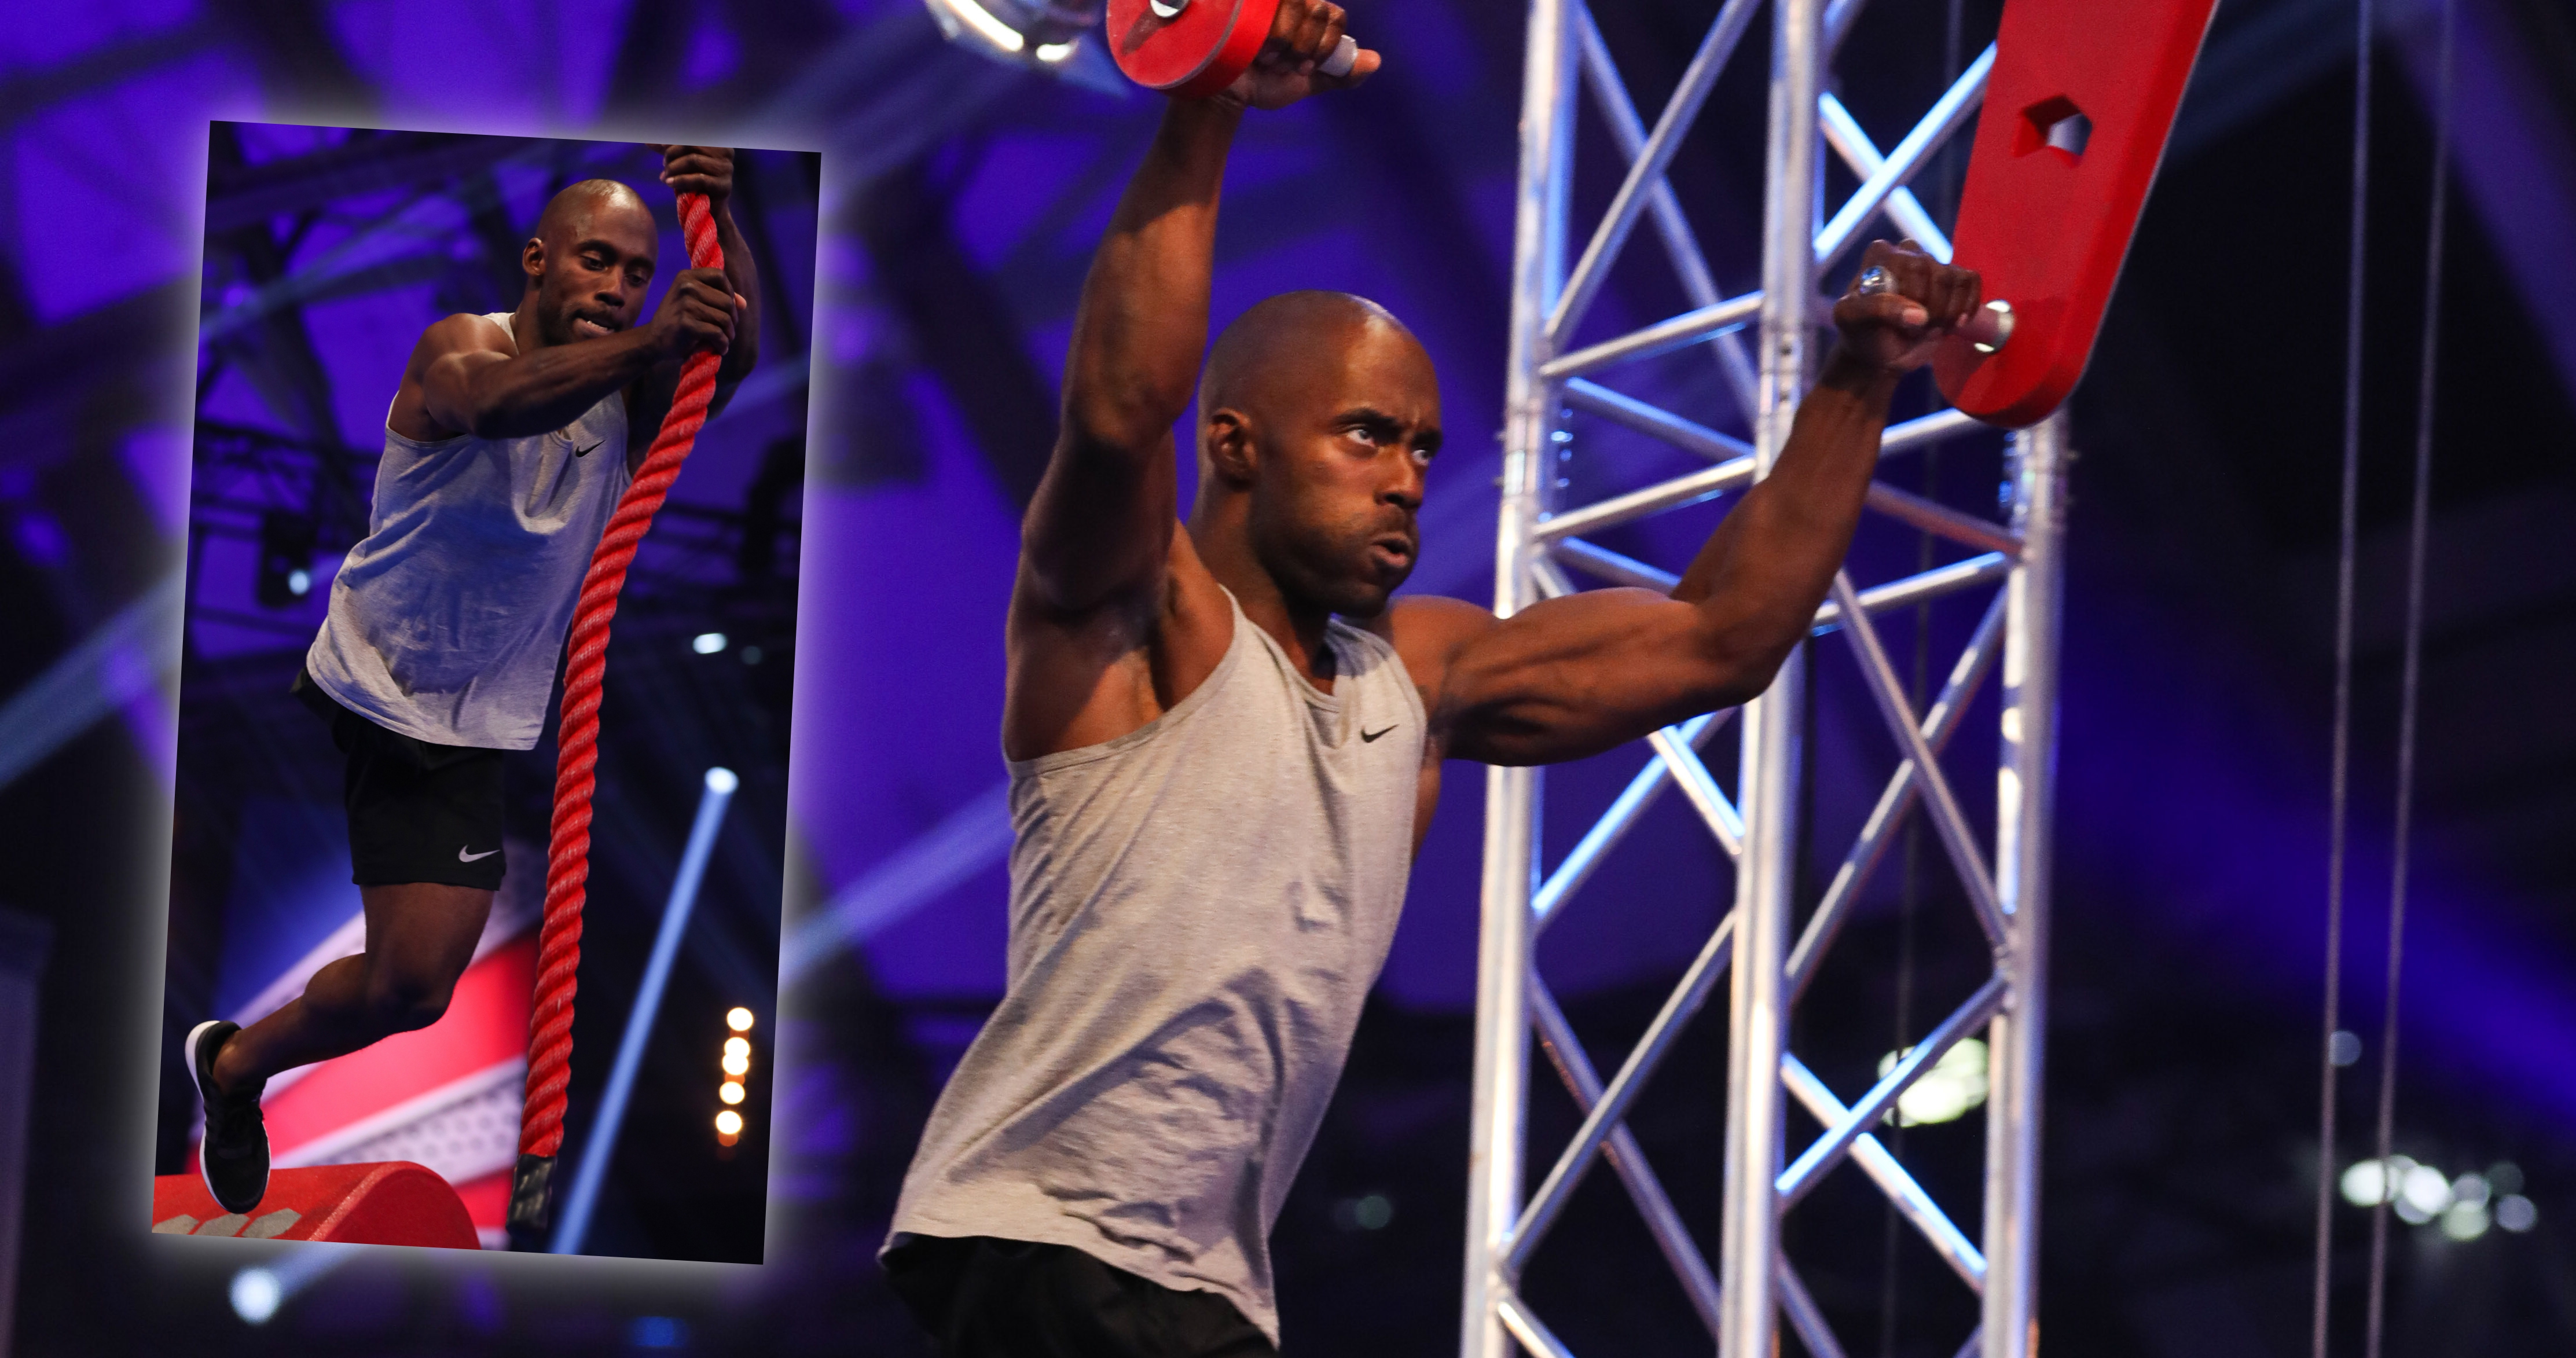 Meet the incredible Ninja Warrior competitor with one leg - Tyler Saunders suffered with a disorder from birth!